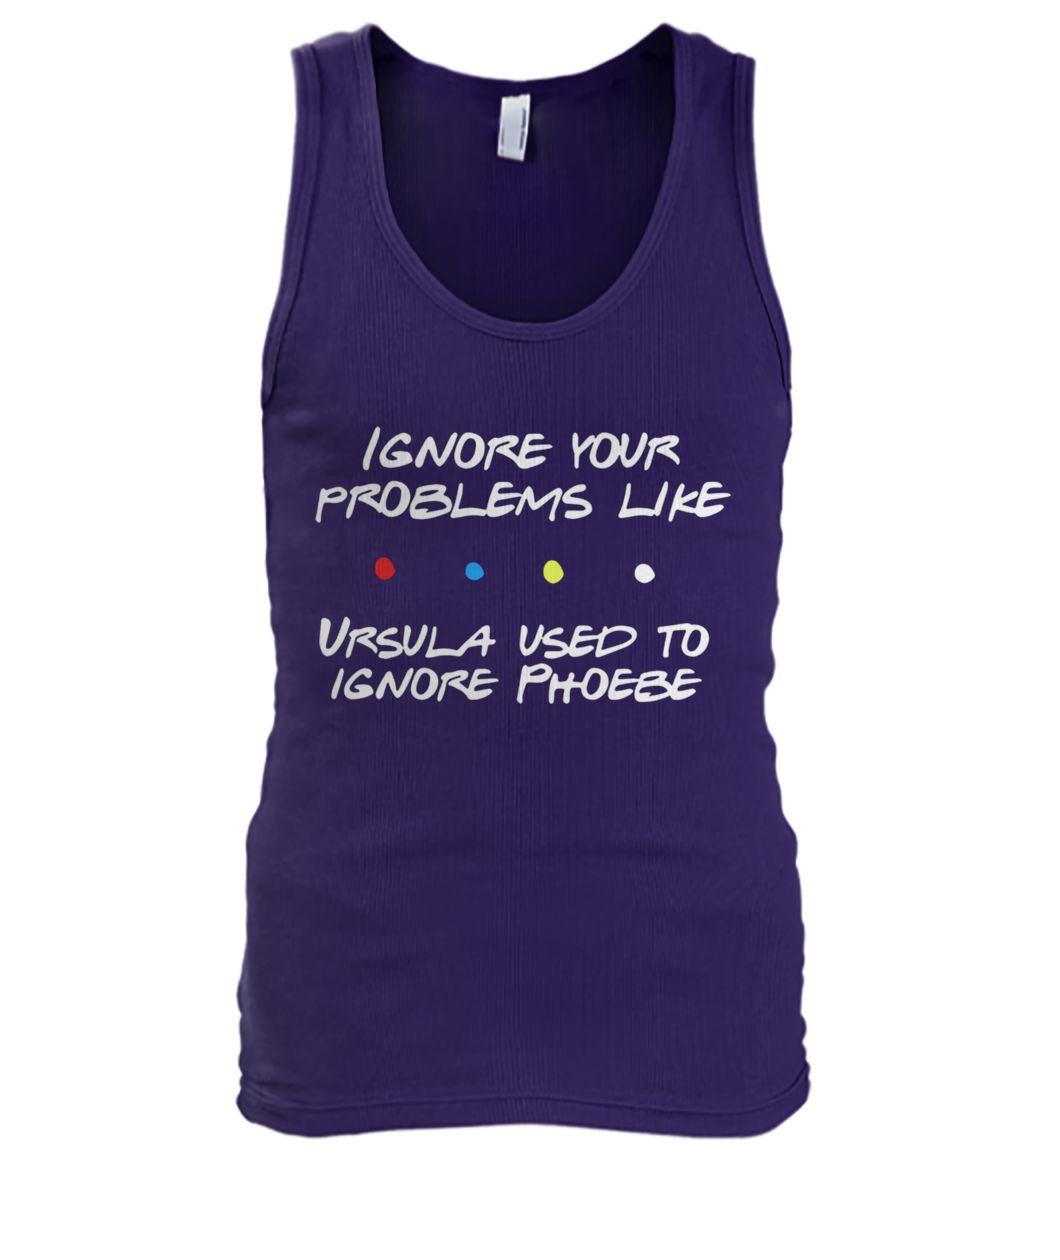 Friends tv show ignore your problems like ursula used to ignore phoebe men's tank top